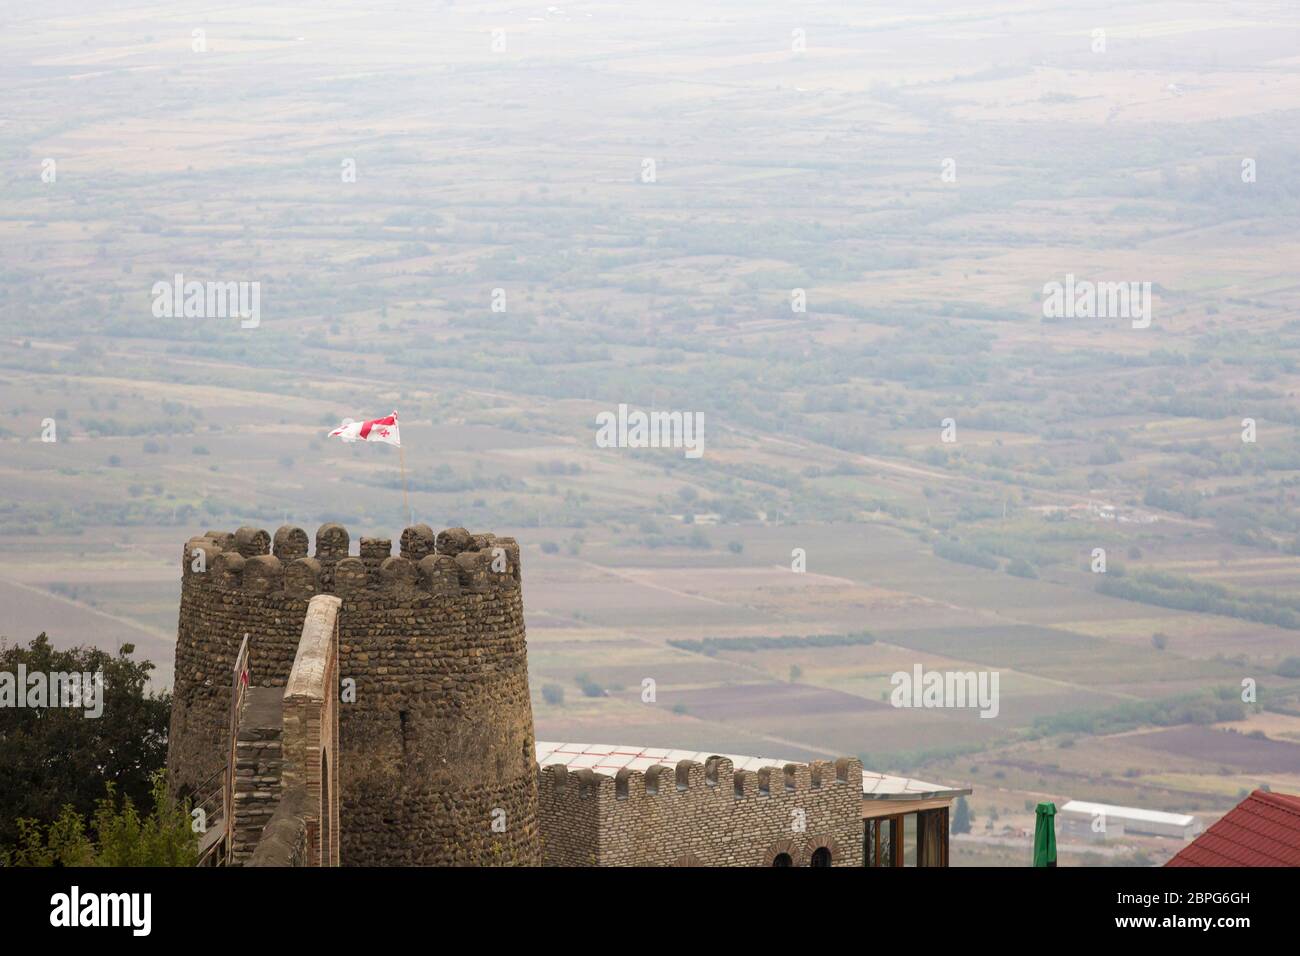 Signagi city walls guard the Eastern Georgian town, which is a magnet for tourism both domestic and international. Stock Photo